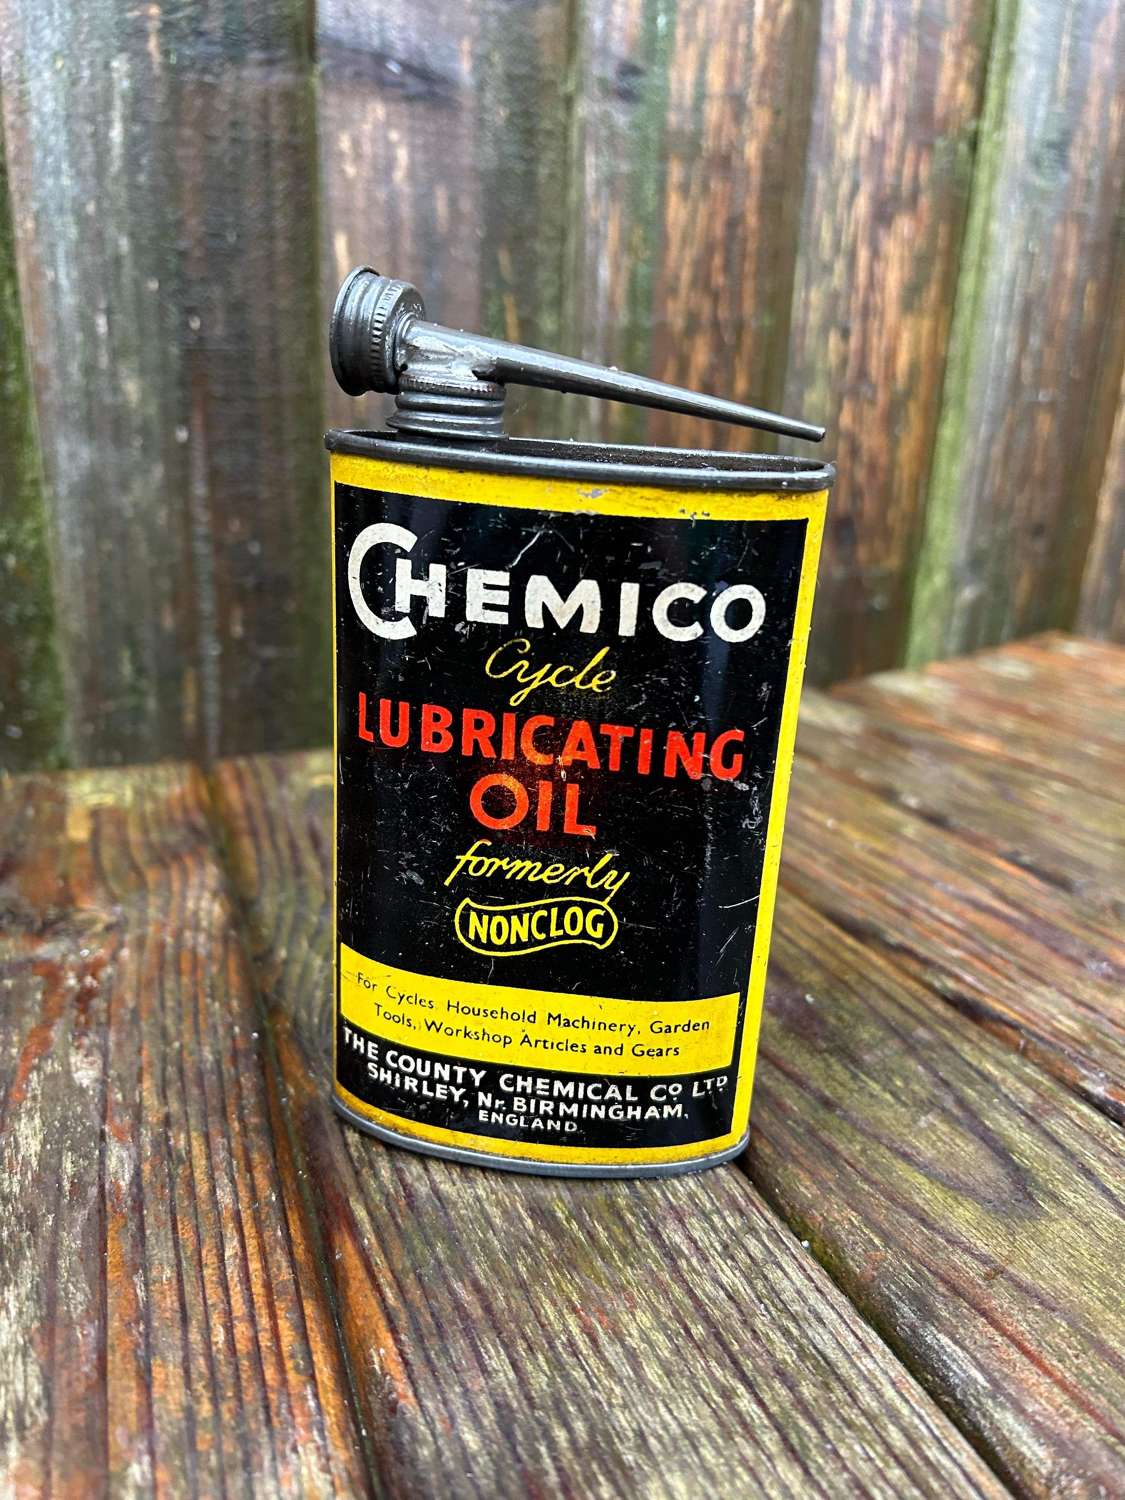 Chemico cycle lubricating oil tin